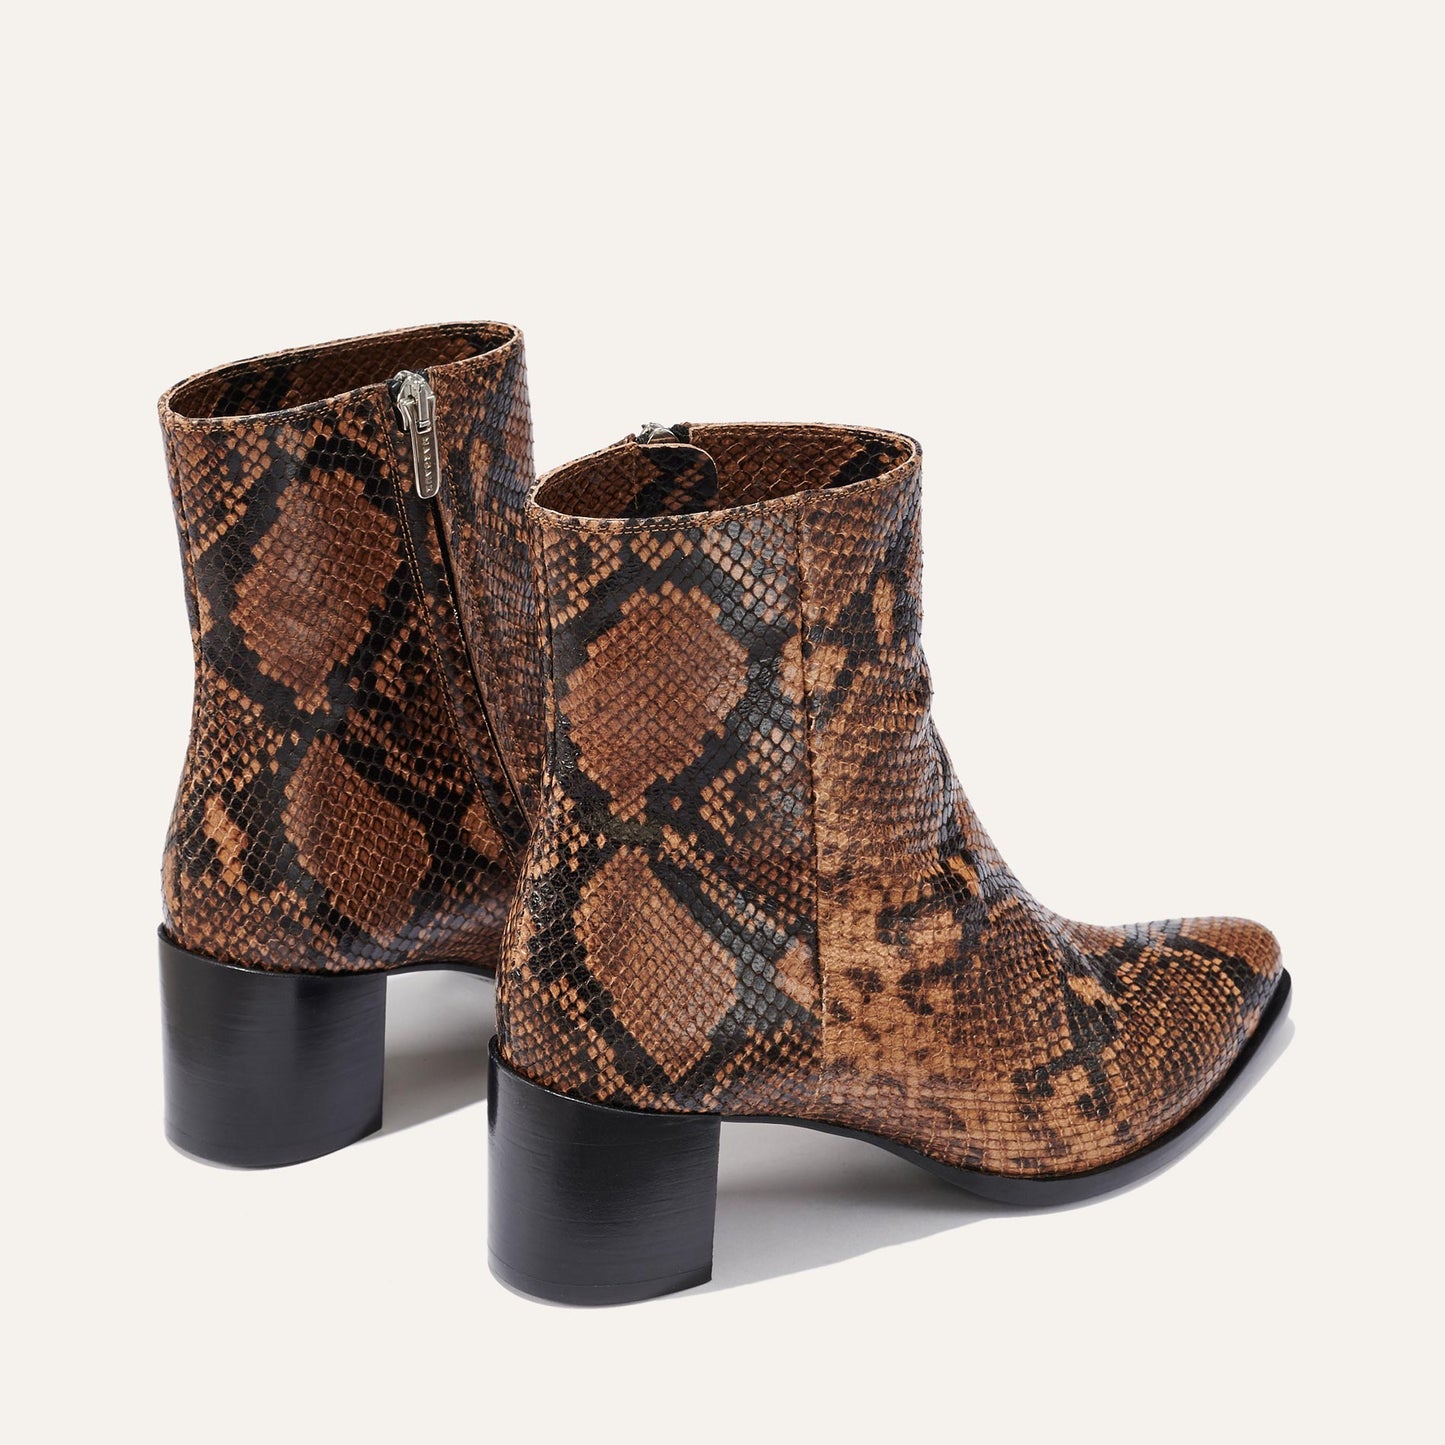 The Downtown Boot - Espresso Python Embossed